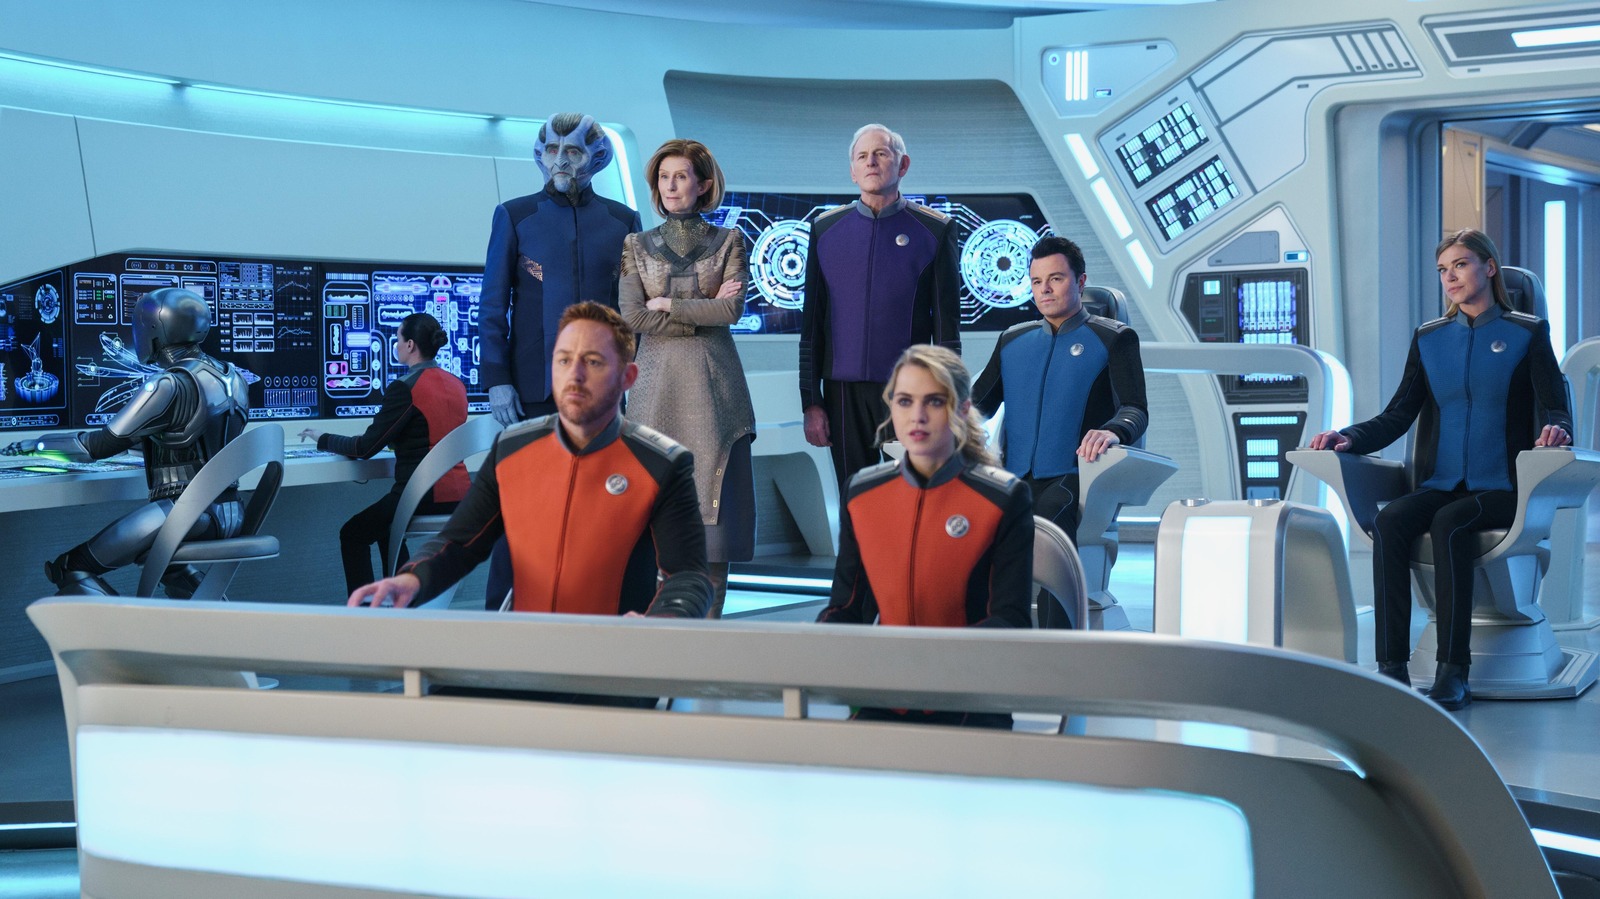 Here’s When You Can Stream The Orville On Disney+